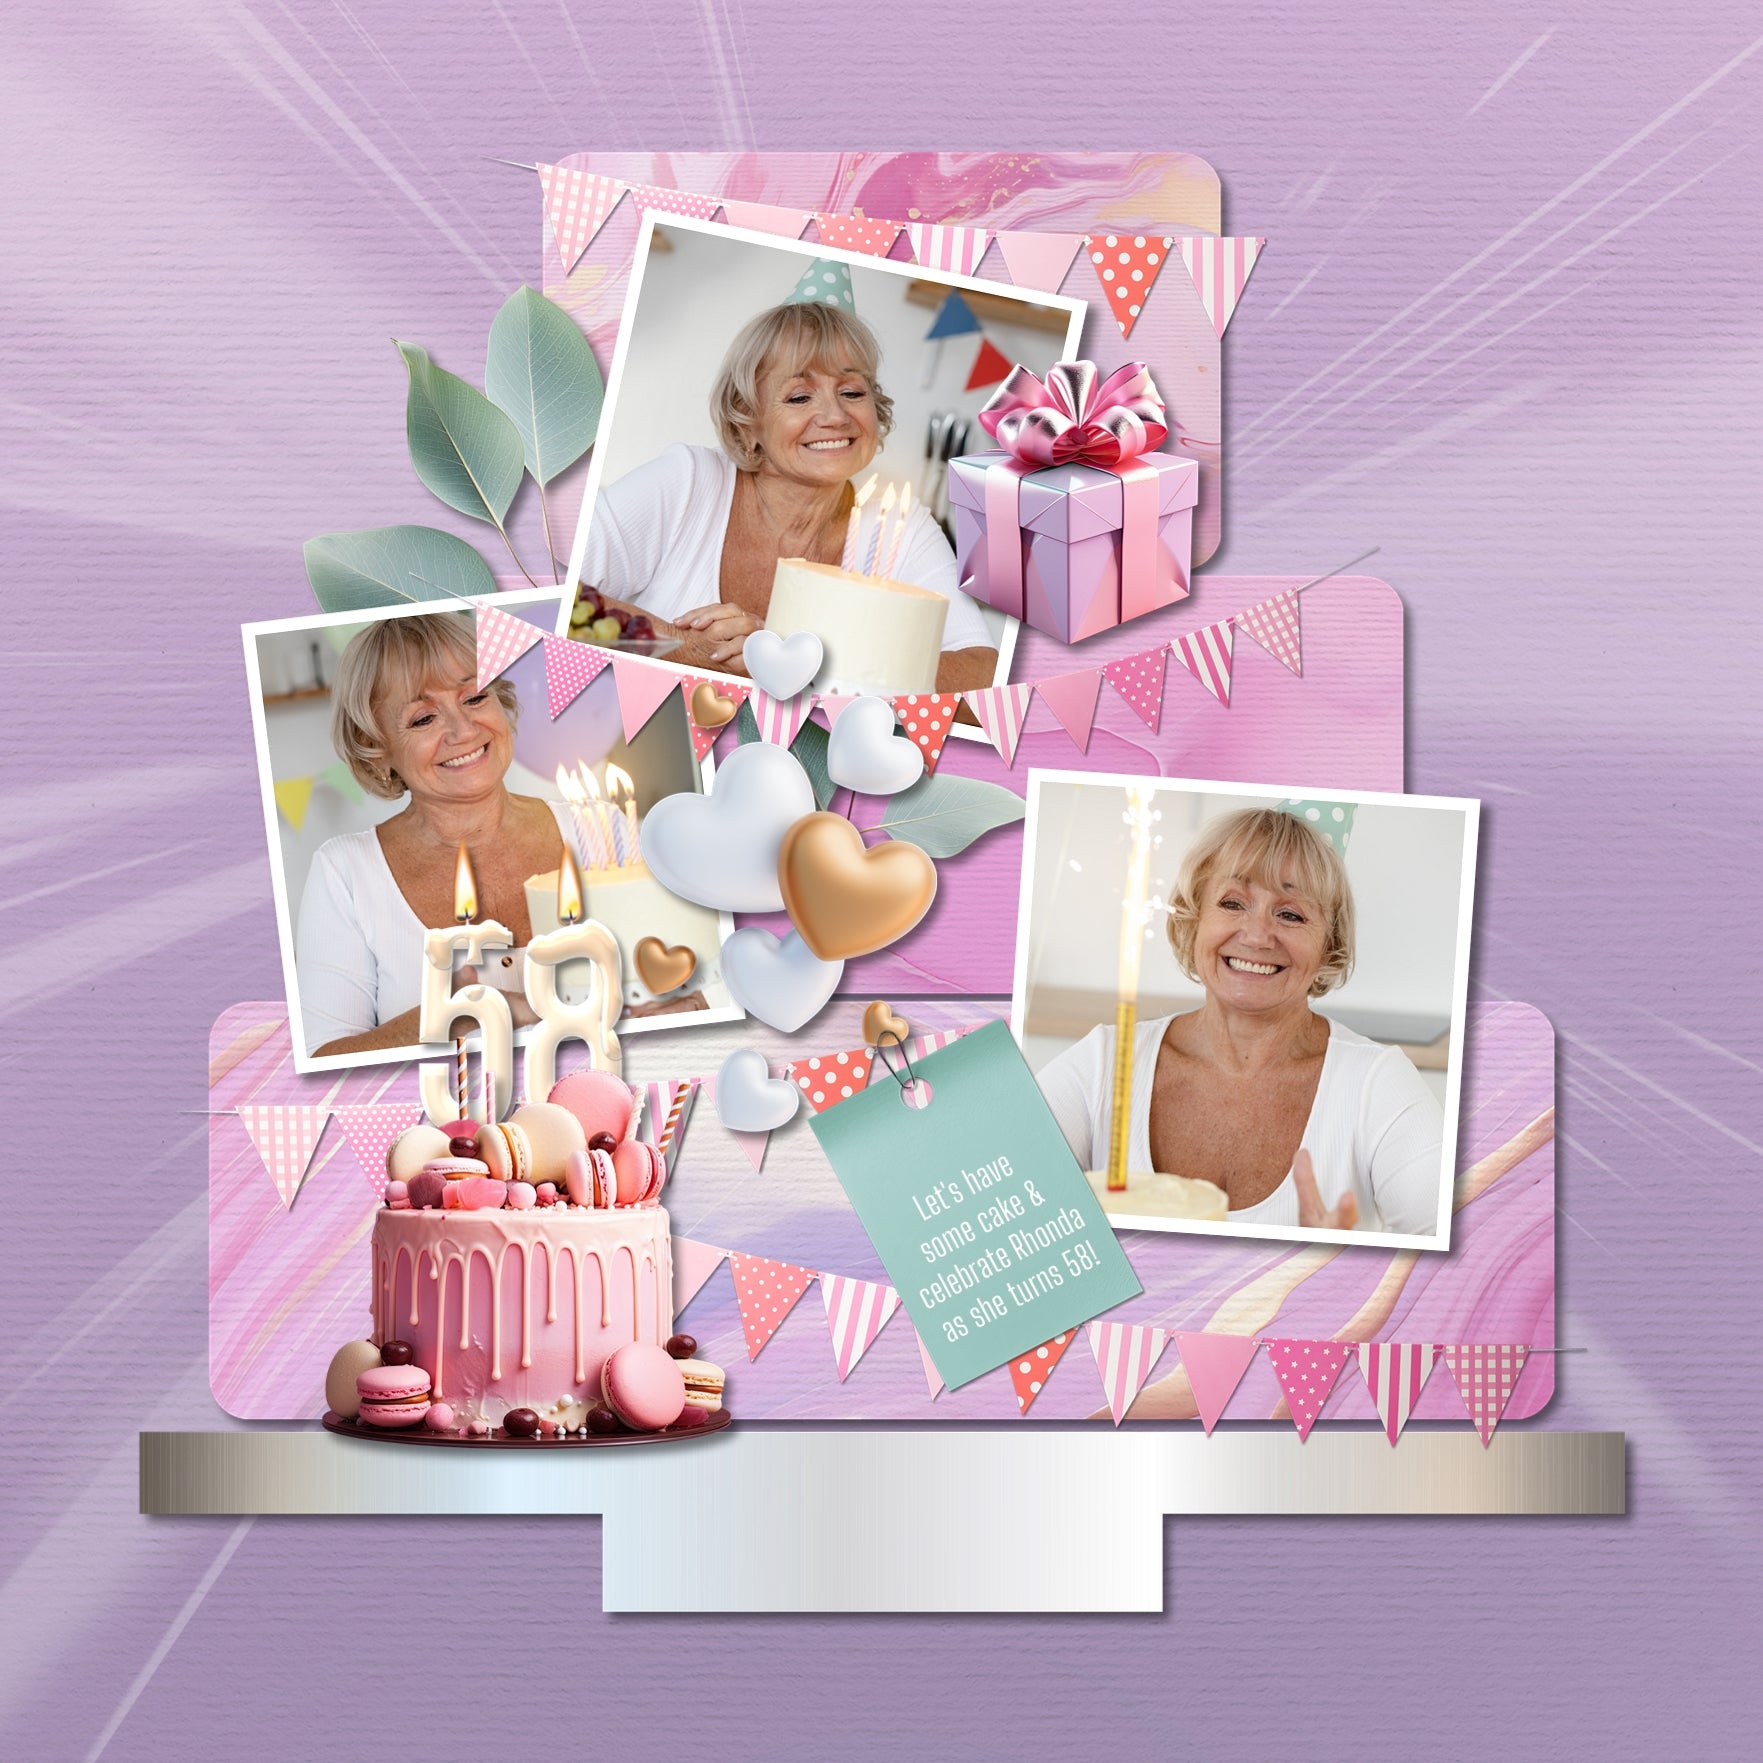 Enjoy the memories created with your girlfriends as you celebrate your birthdays together. These fun digital scrapbooking dripping birthday candle alphabet letters, numbers, and some punctuation by Lucky Girl Creative Digital Art will add warmth to all your digital pages. Great for birthdays from 1 - 100! The Birthday Girlfriend Candles Alpha Set consists of a full set of digital art uppercase letters A-Z, numbers 0-9, and some punctuation. 